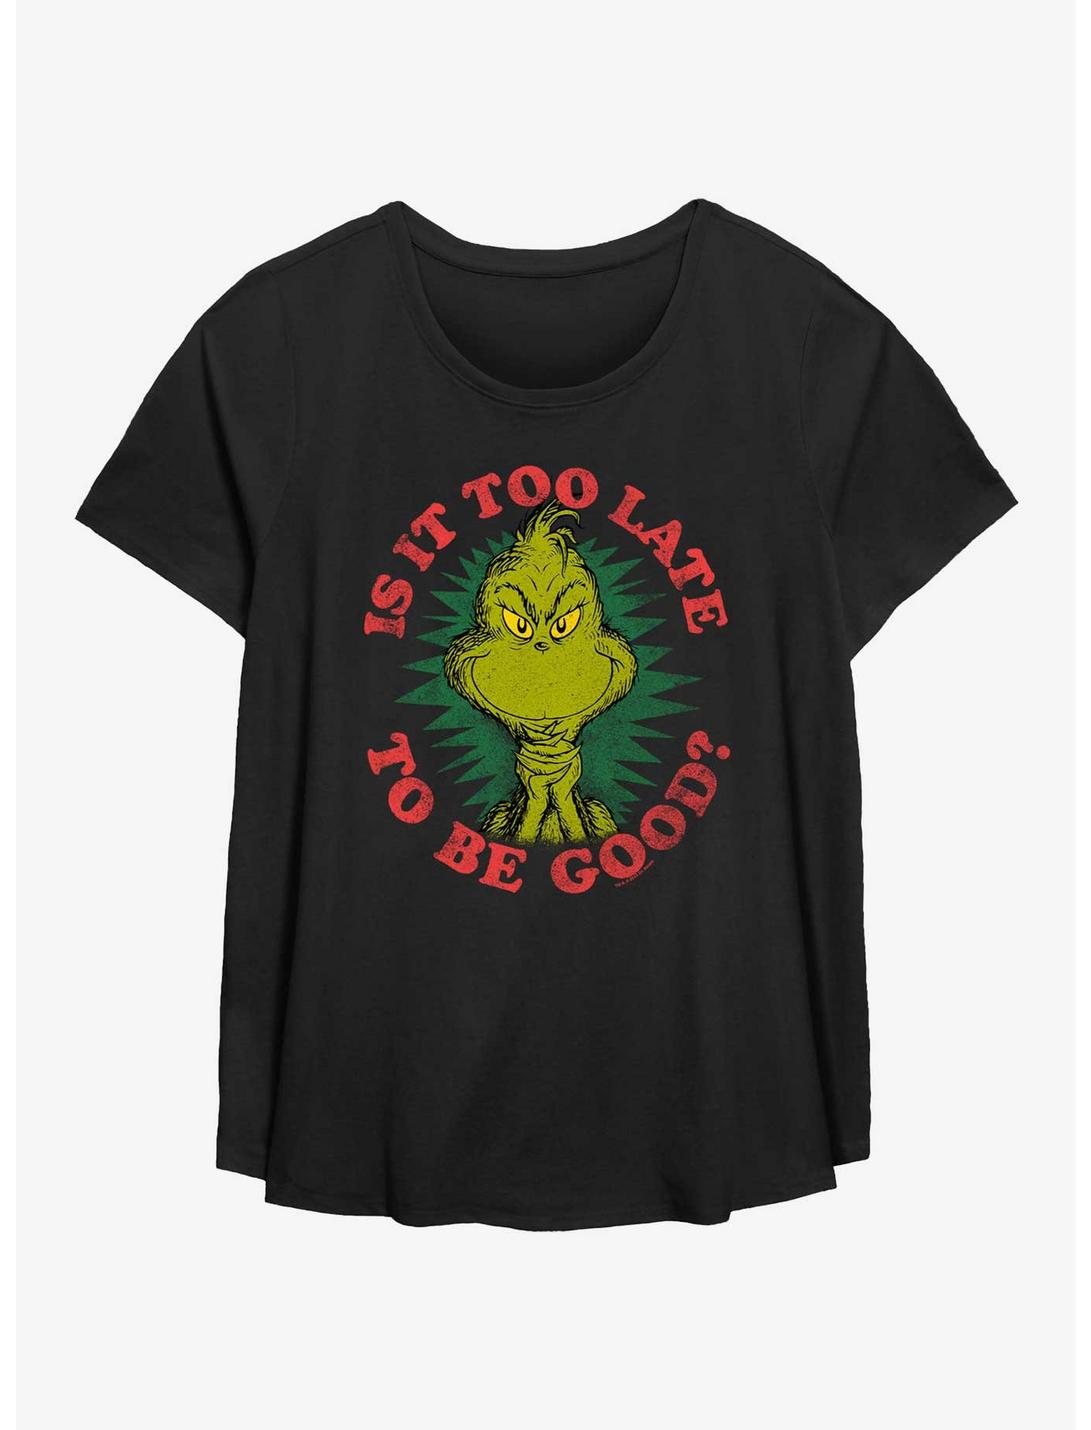 Dr. Seuss How The Grinch Stole Christmas Too Late To Be Good Girls T-Shirt Plus Size, BLACK, hi-res